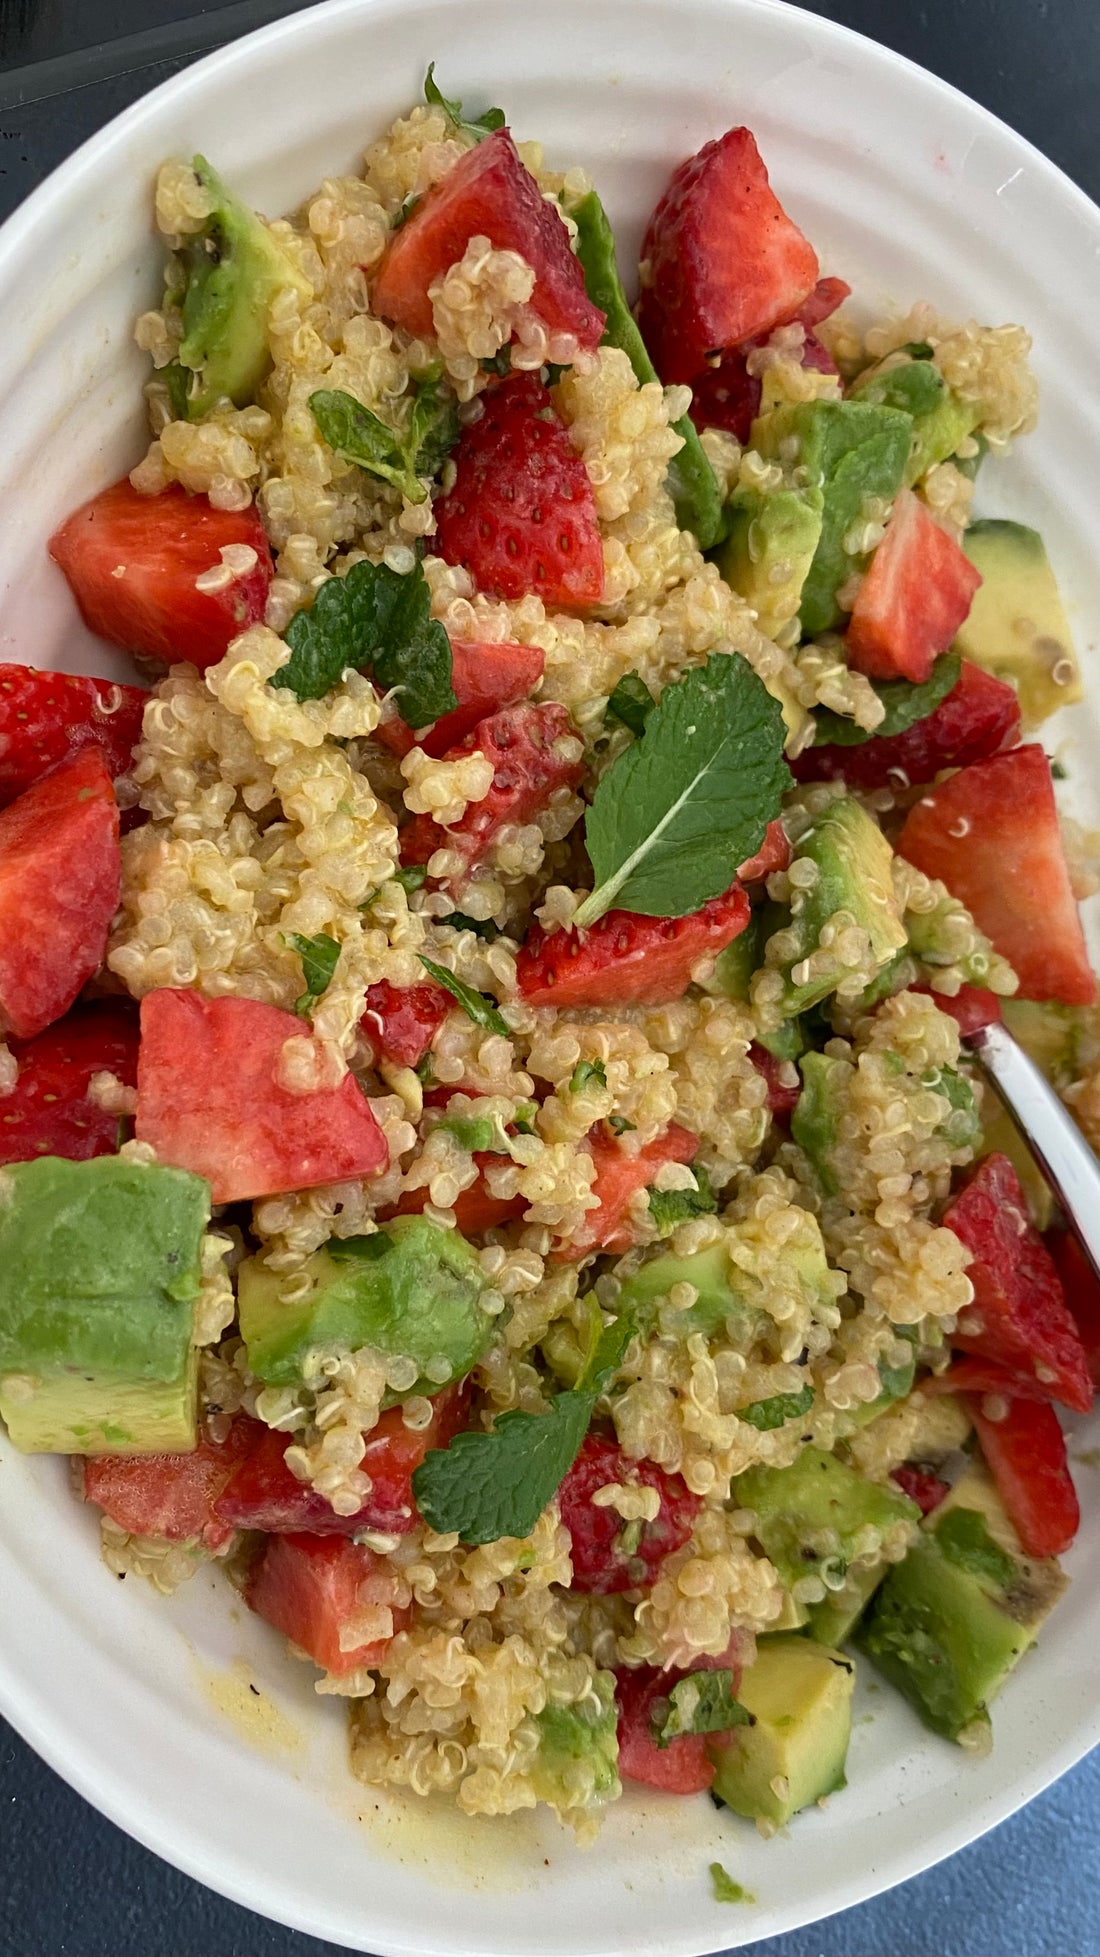 stawberries, avocado, quinoa, mint salad and maple dressing